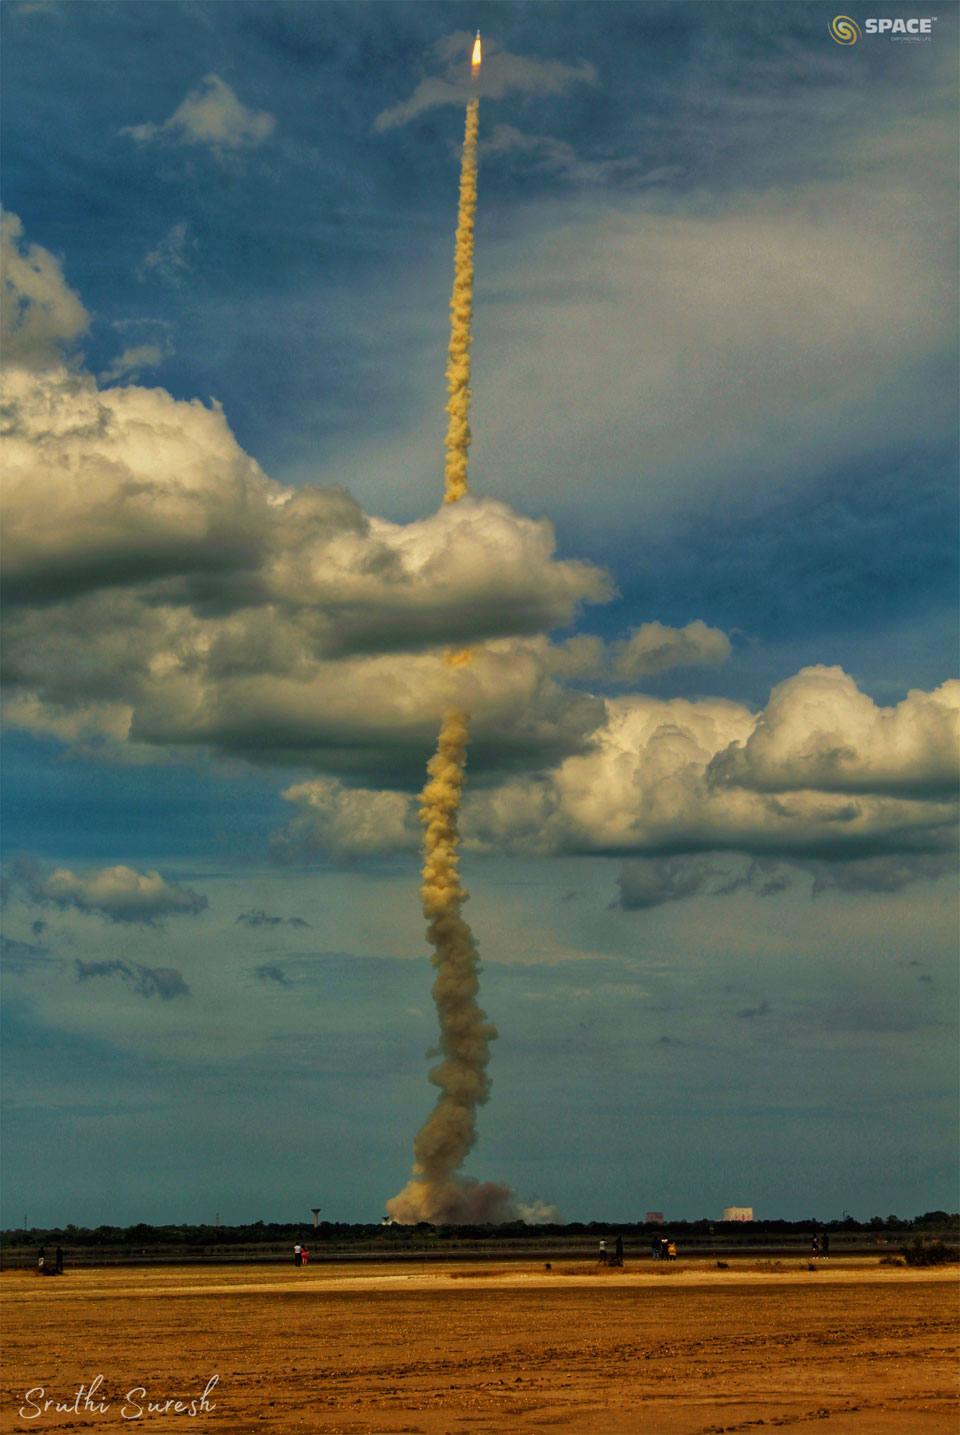 A rocket is seen after lift-off with a long smoke plume.
The rocket is captured against a blue sky and has gone through
a cloud deck. In the foreground is an empty tan-coloured field. 
Please see the explanation for more detailed information.